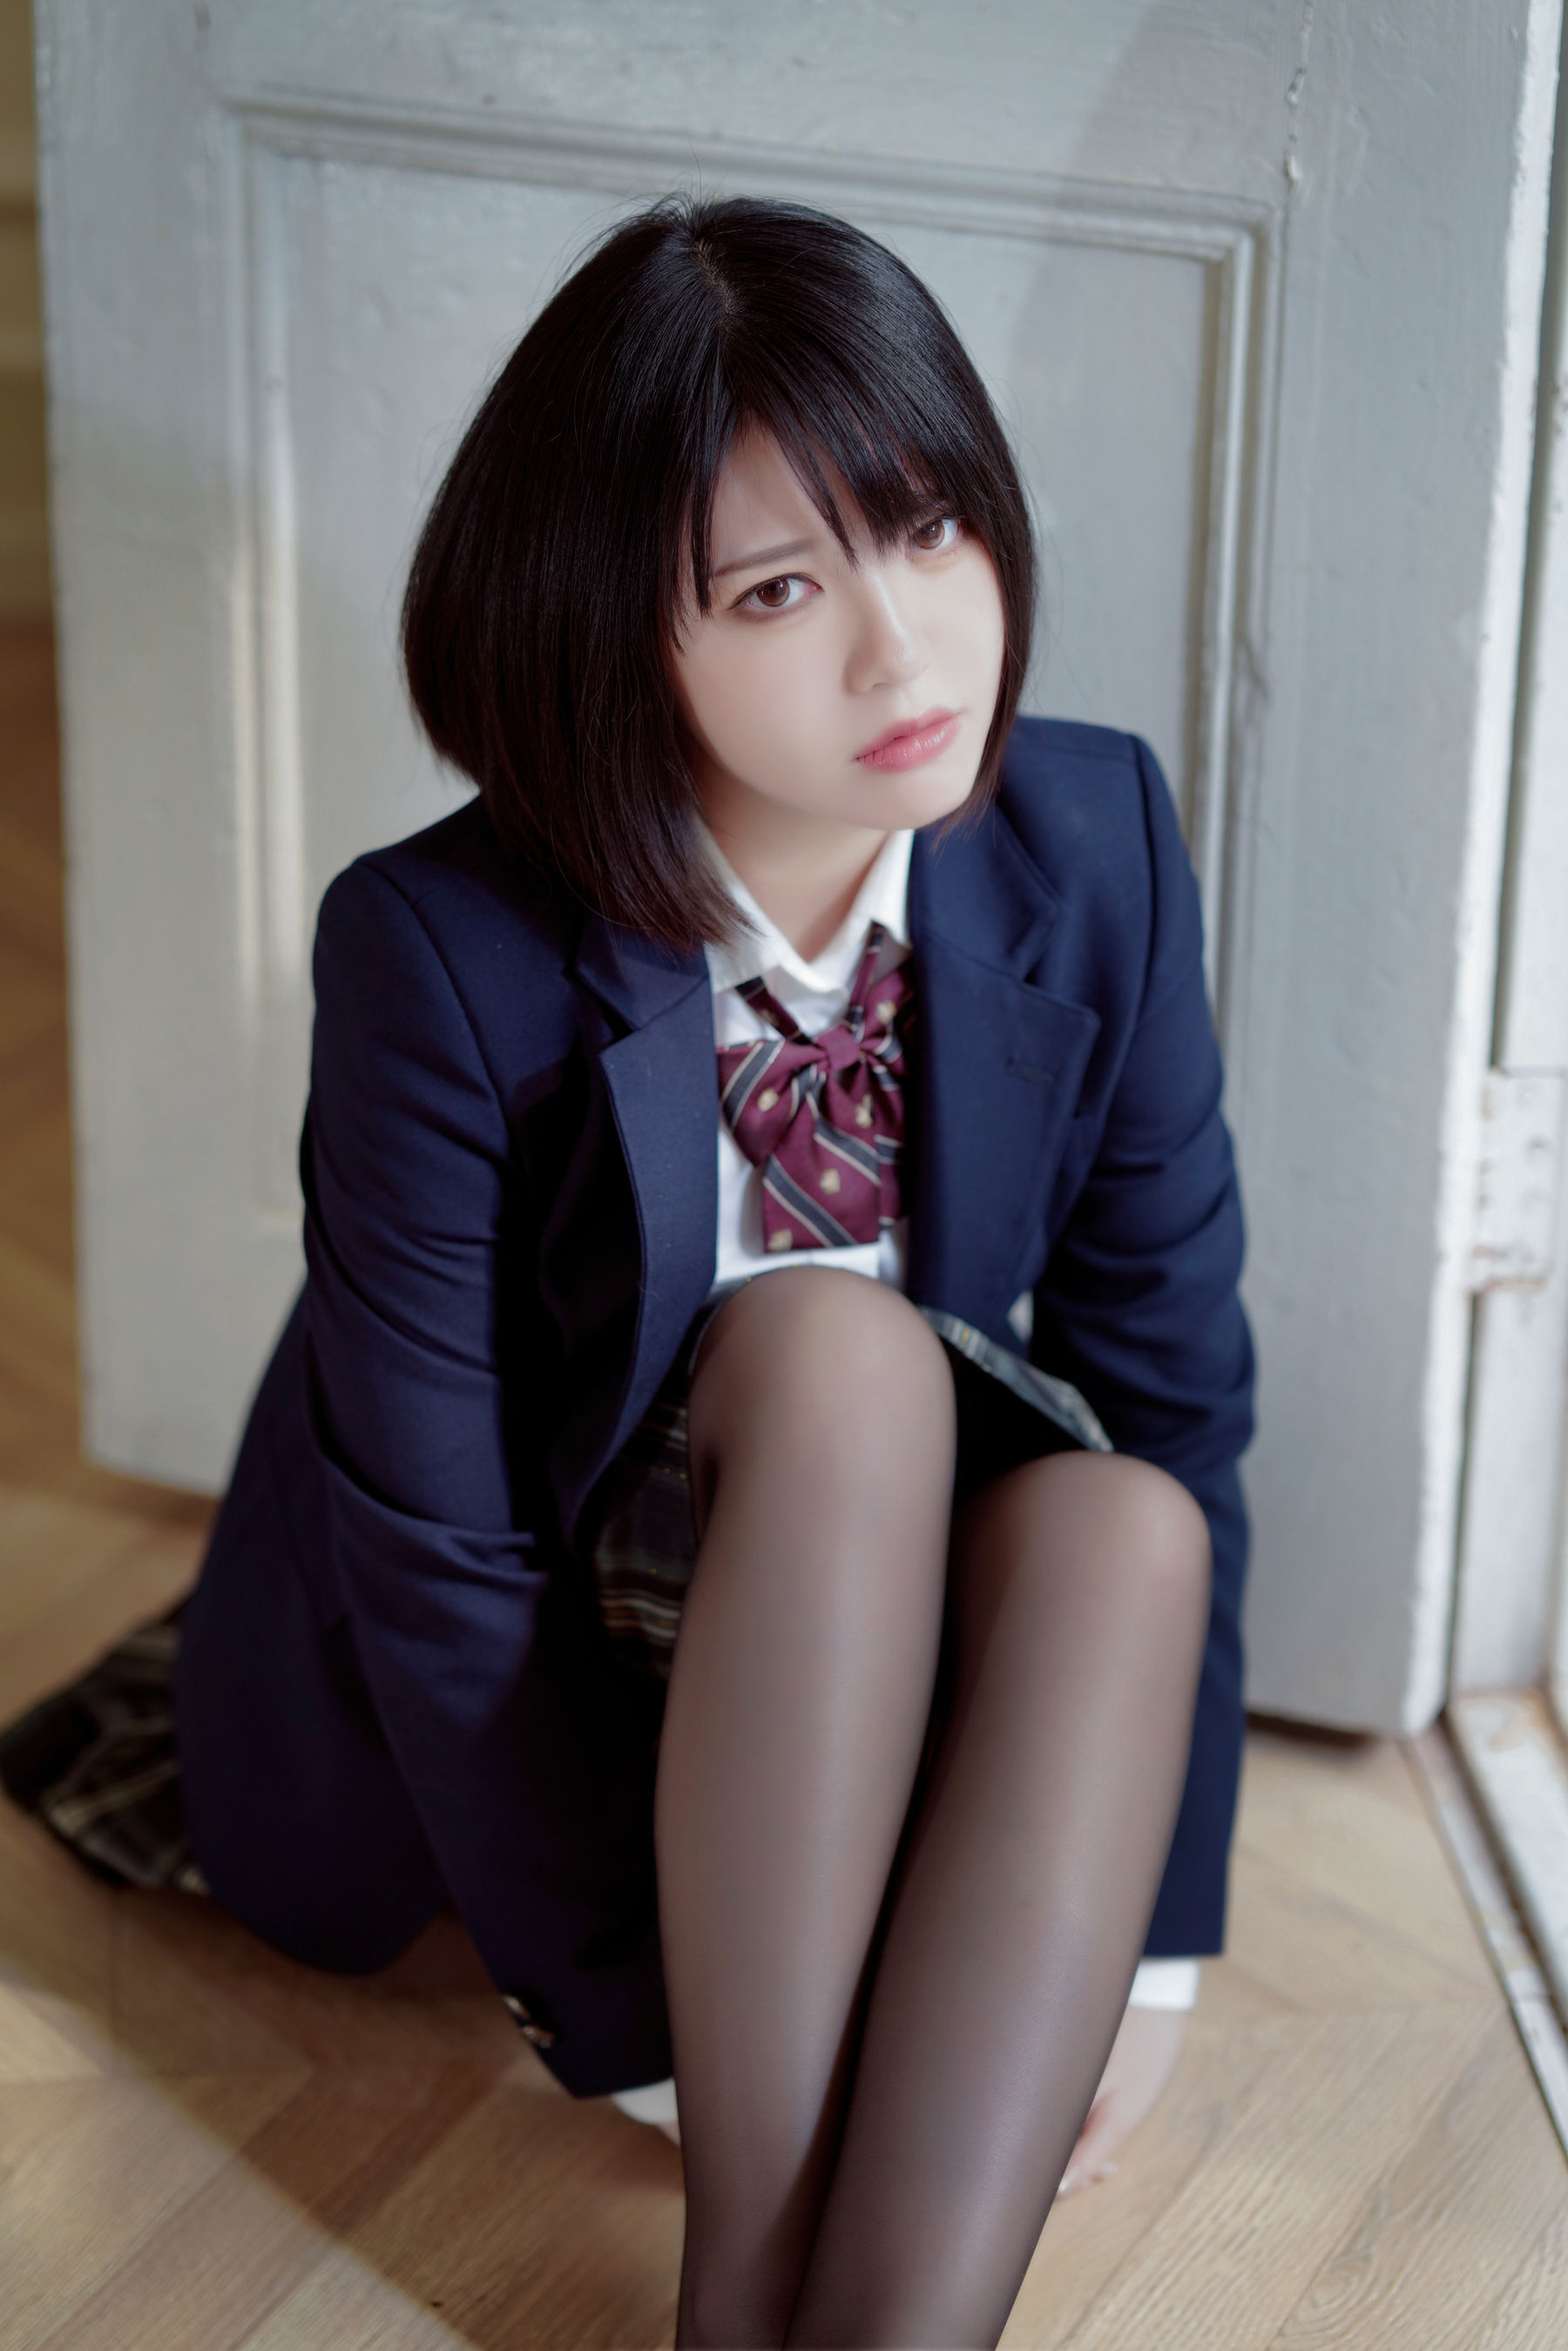 [Net Red COSER Photo] Half-and-a-half-the girl's uniform pose is good Page 31 No.bb668b